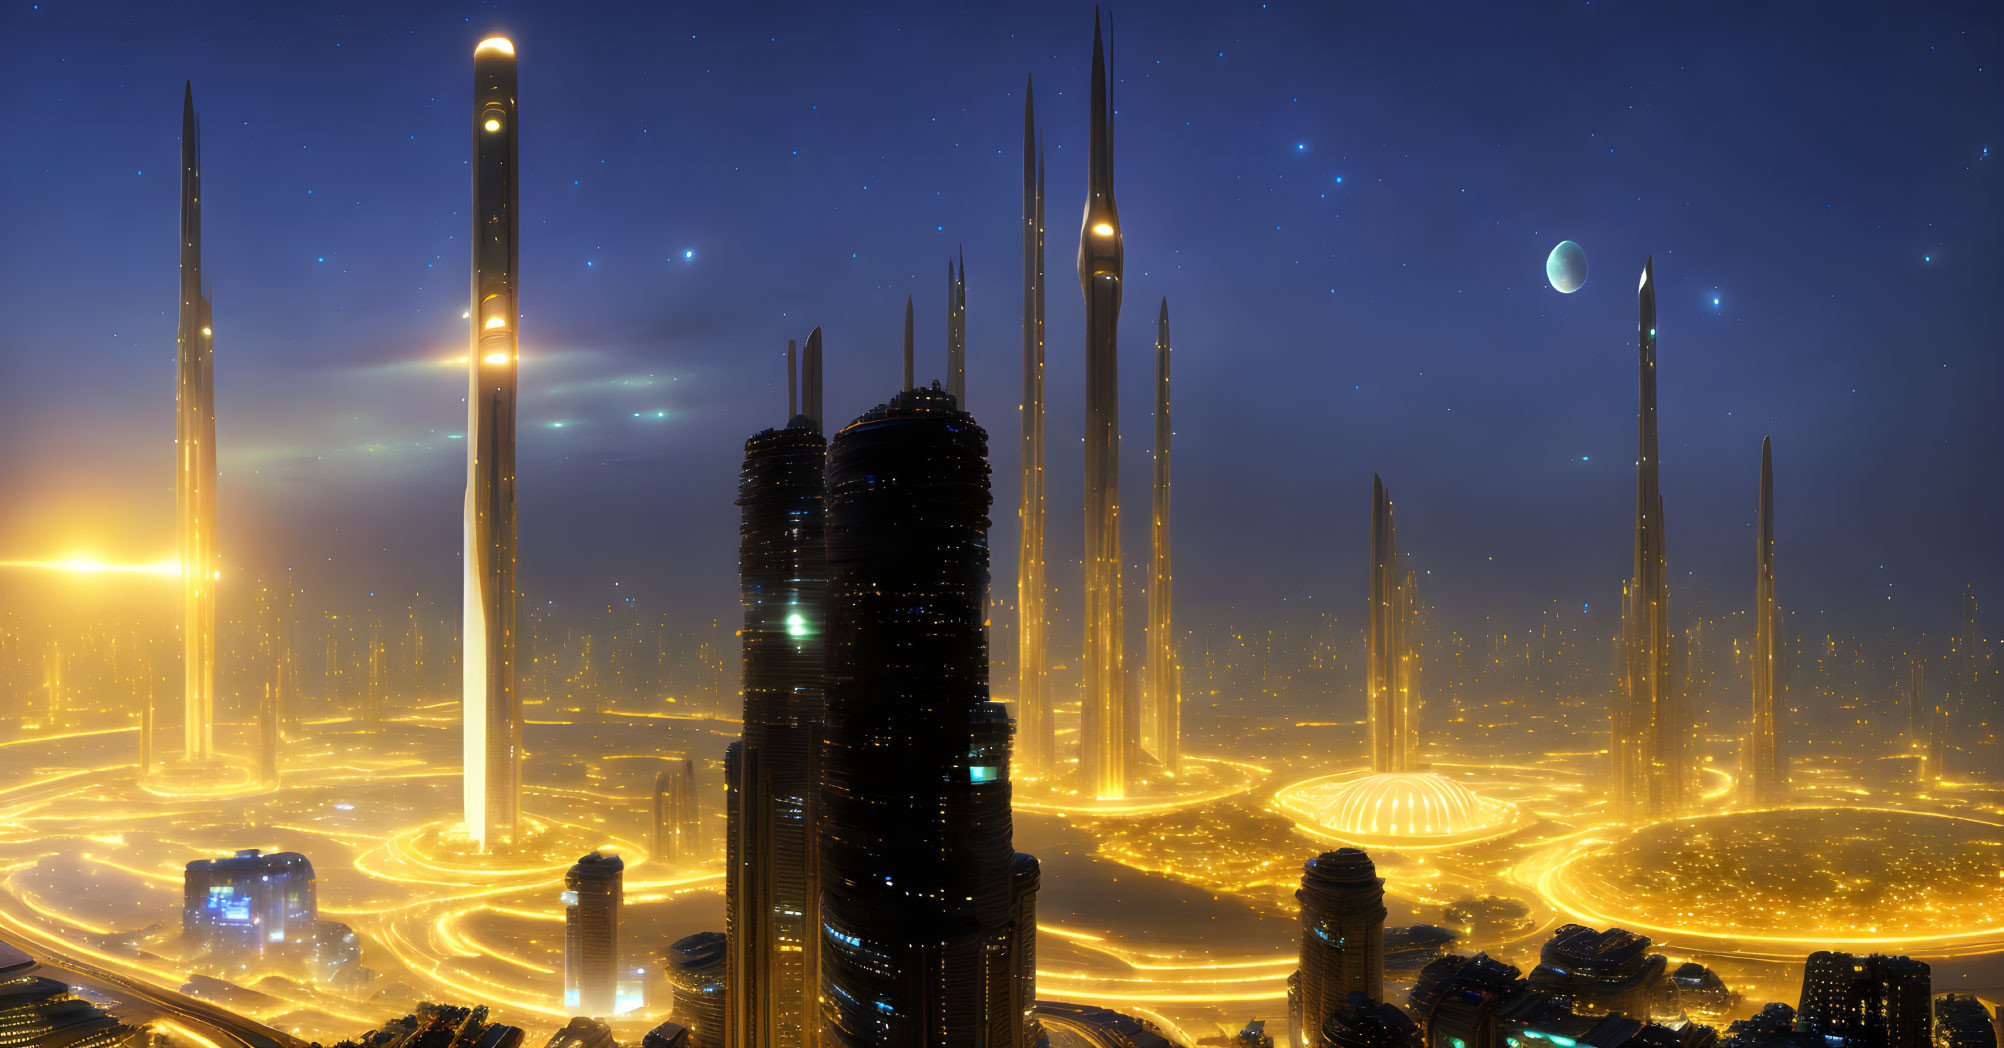 Futuristic night cityscape with high-rise towers and crescent moon